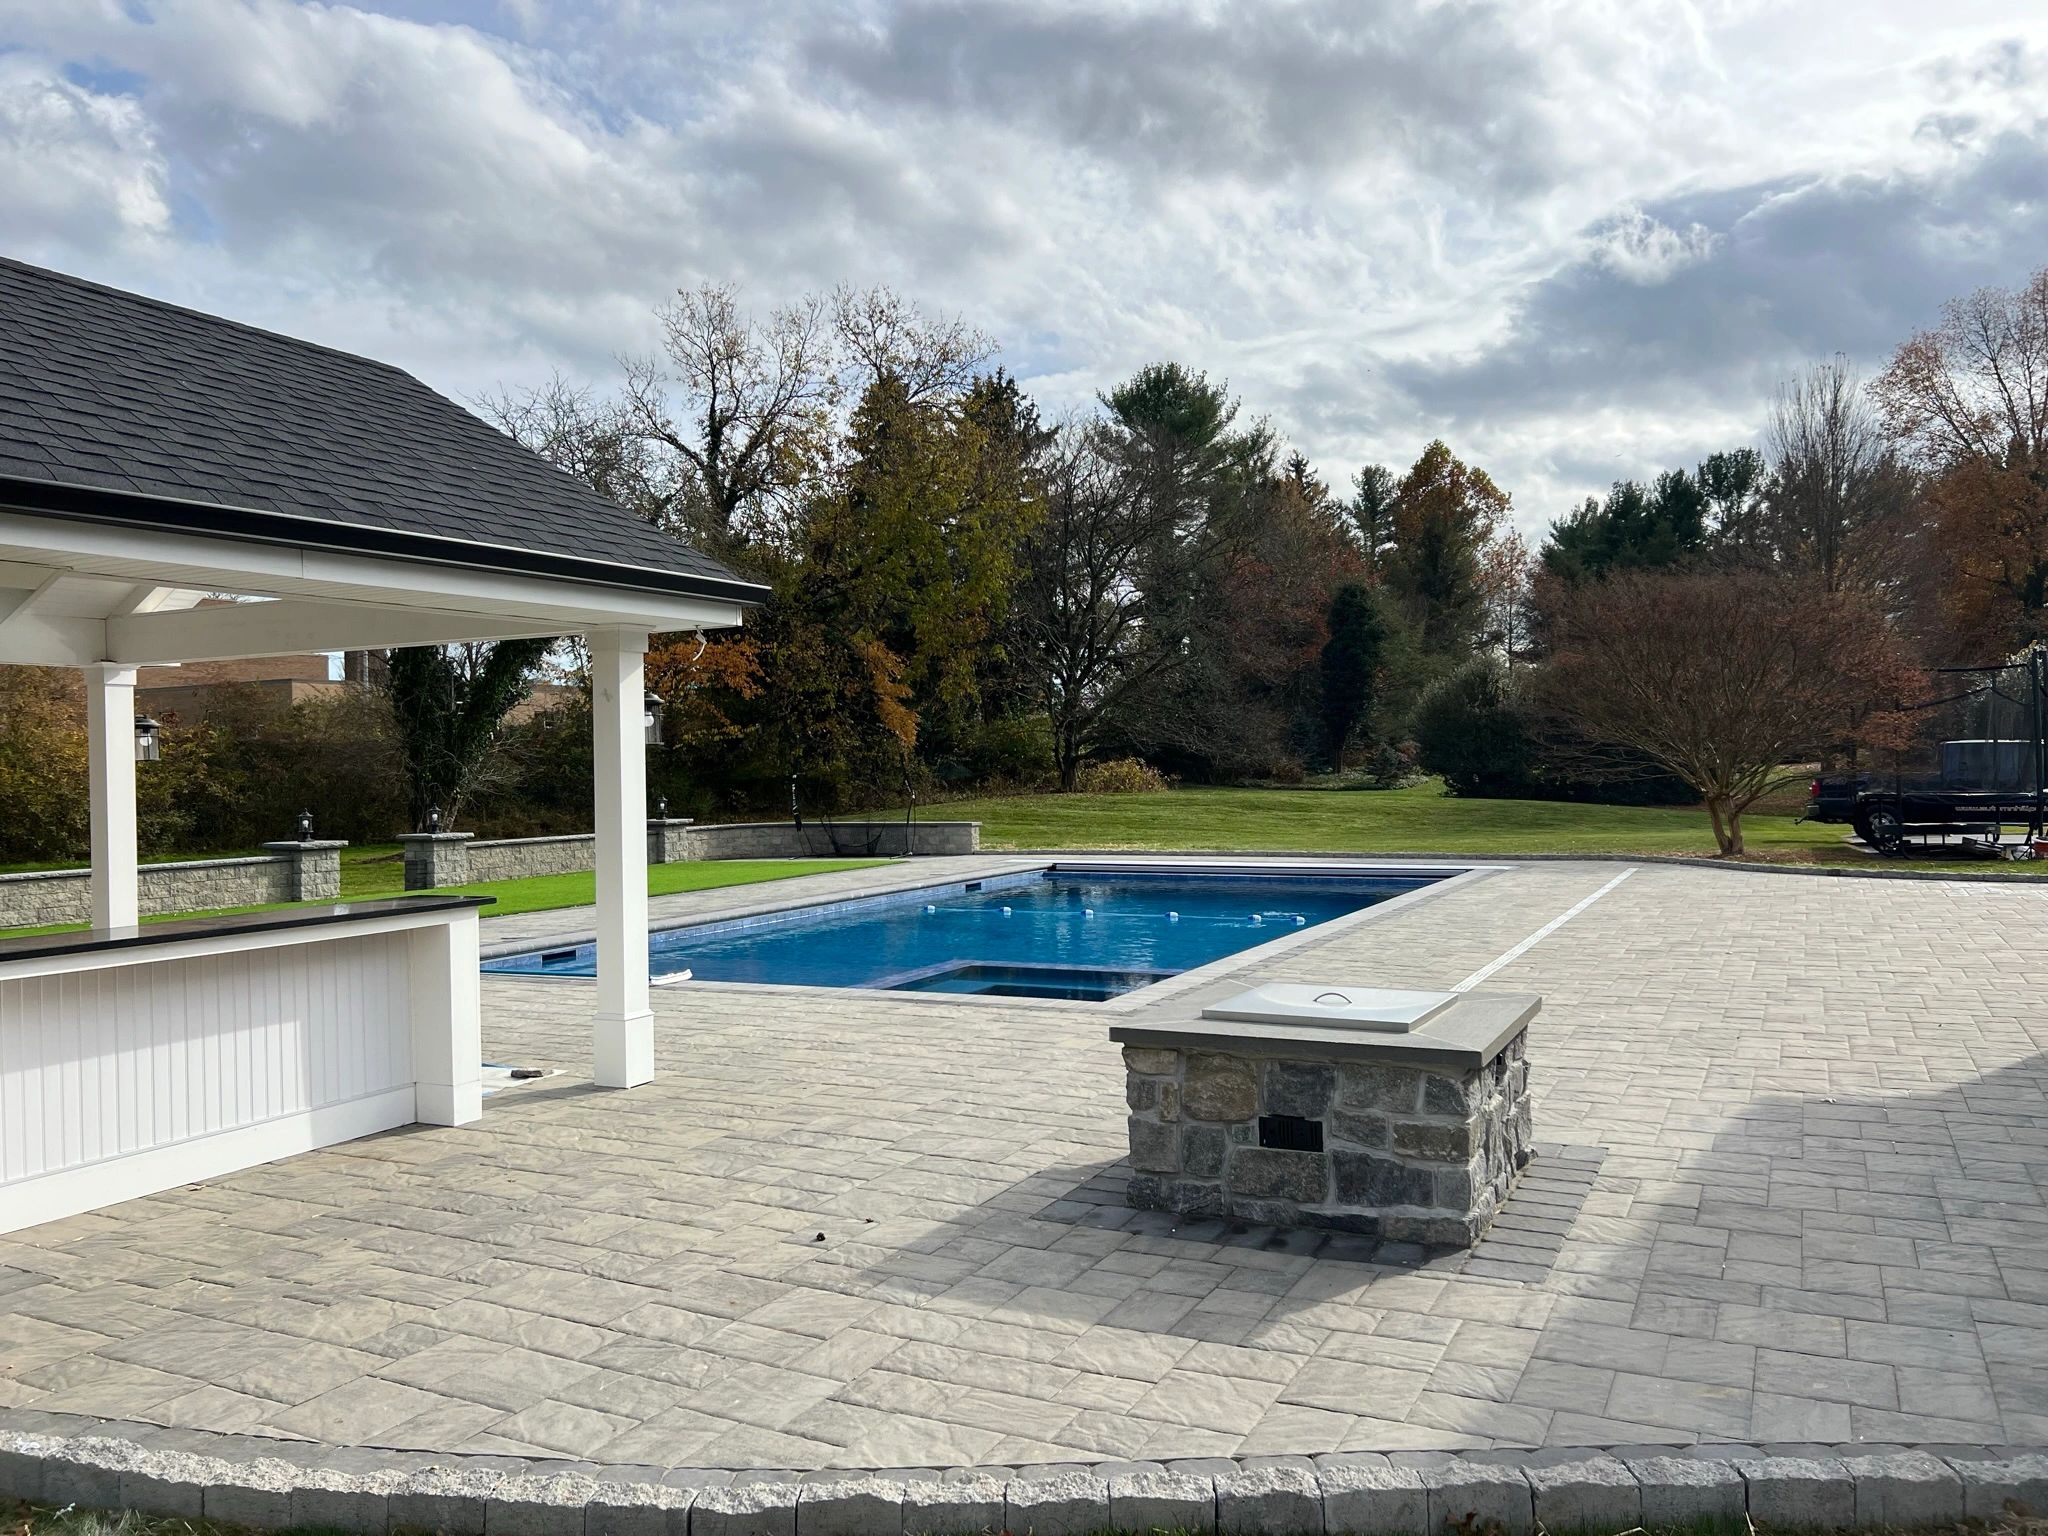 Pool with gas fire pit